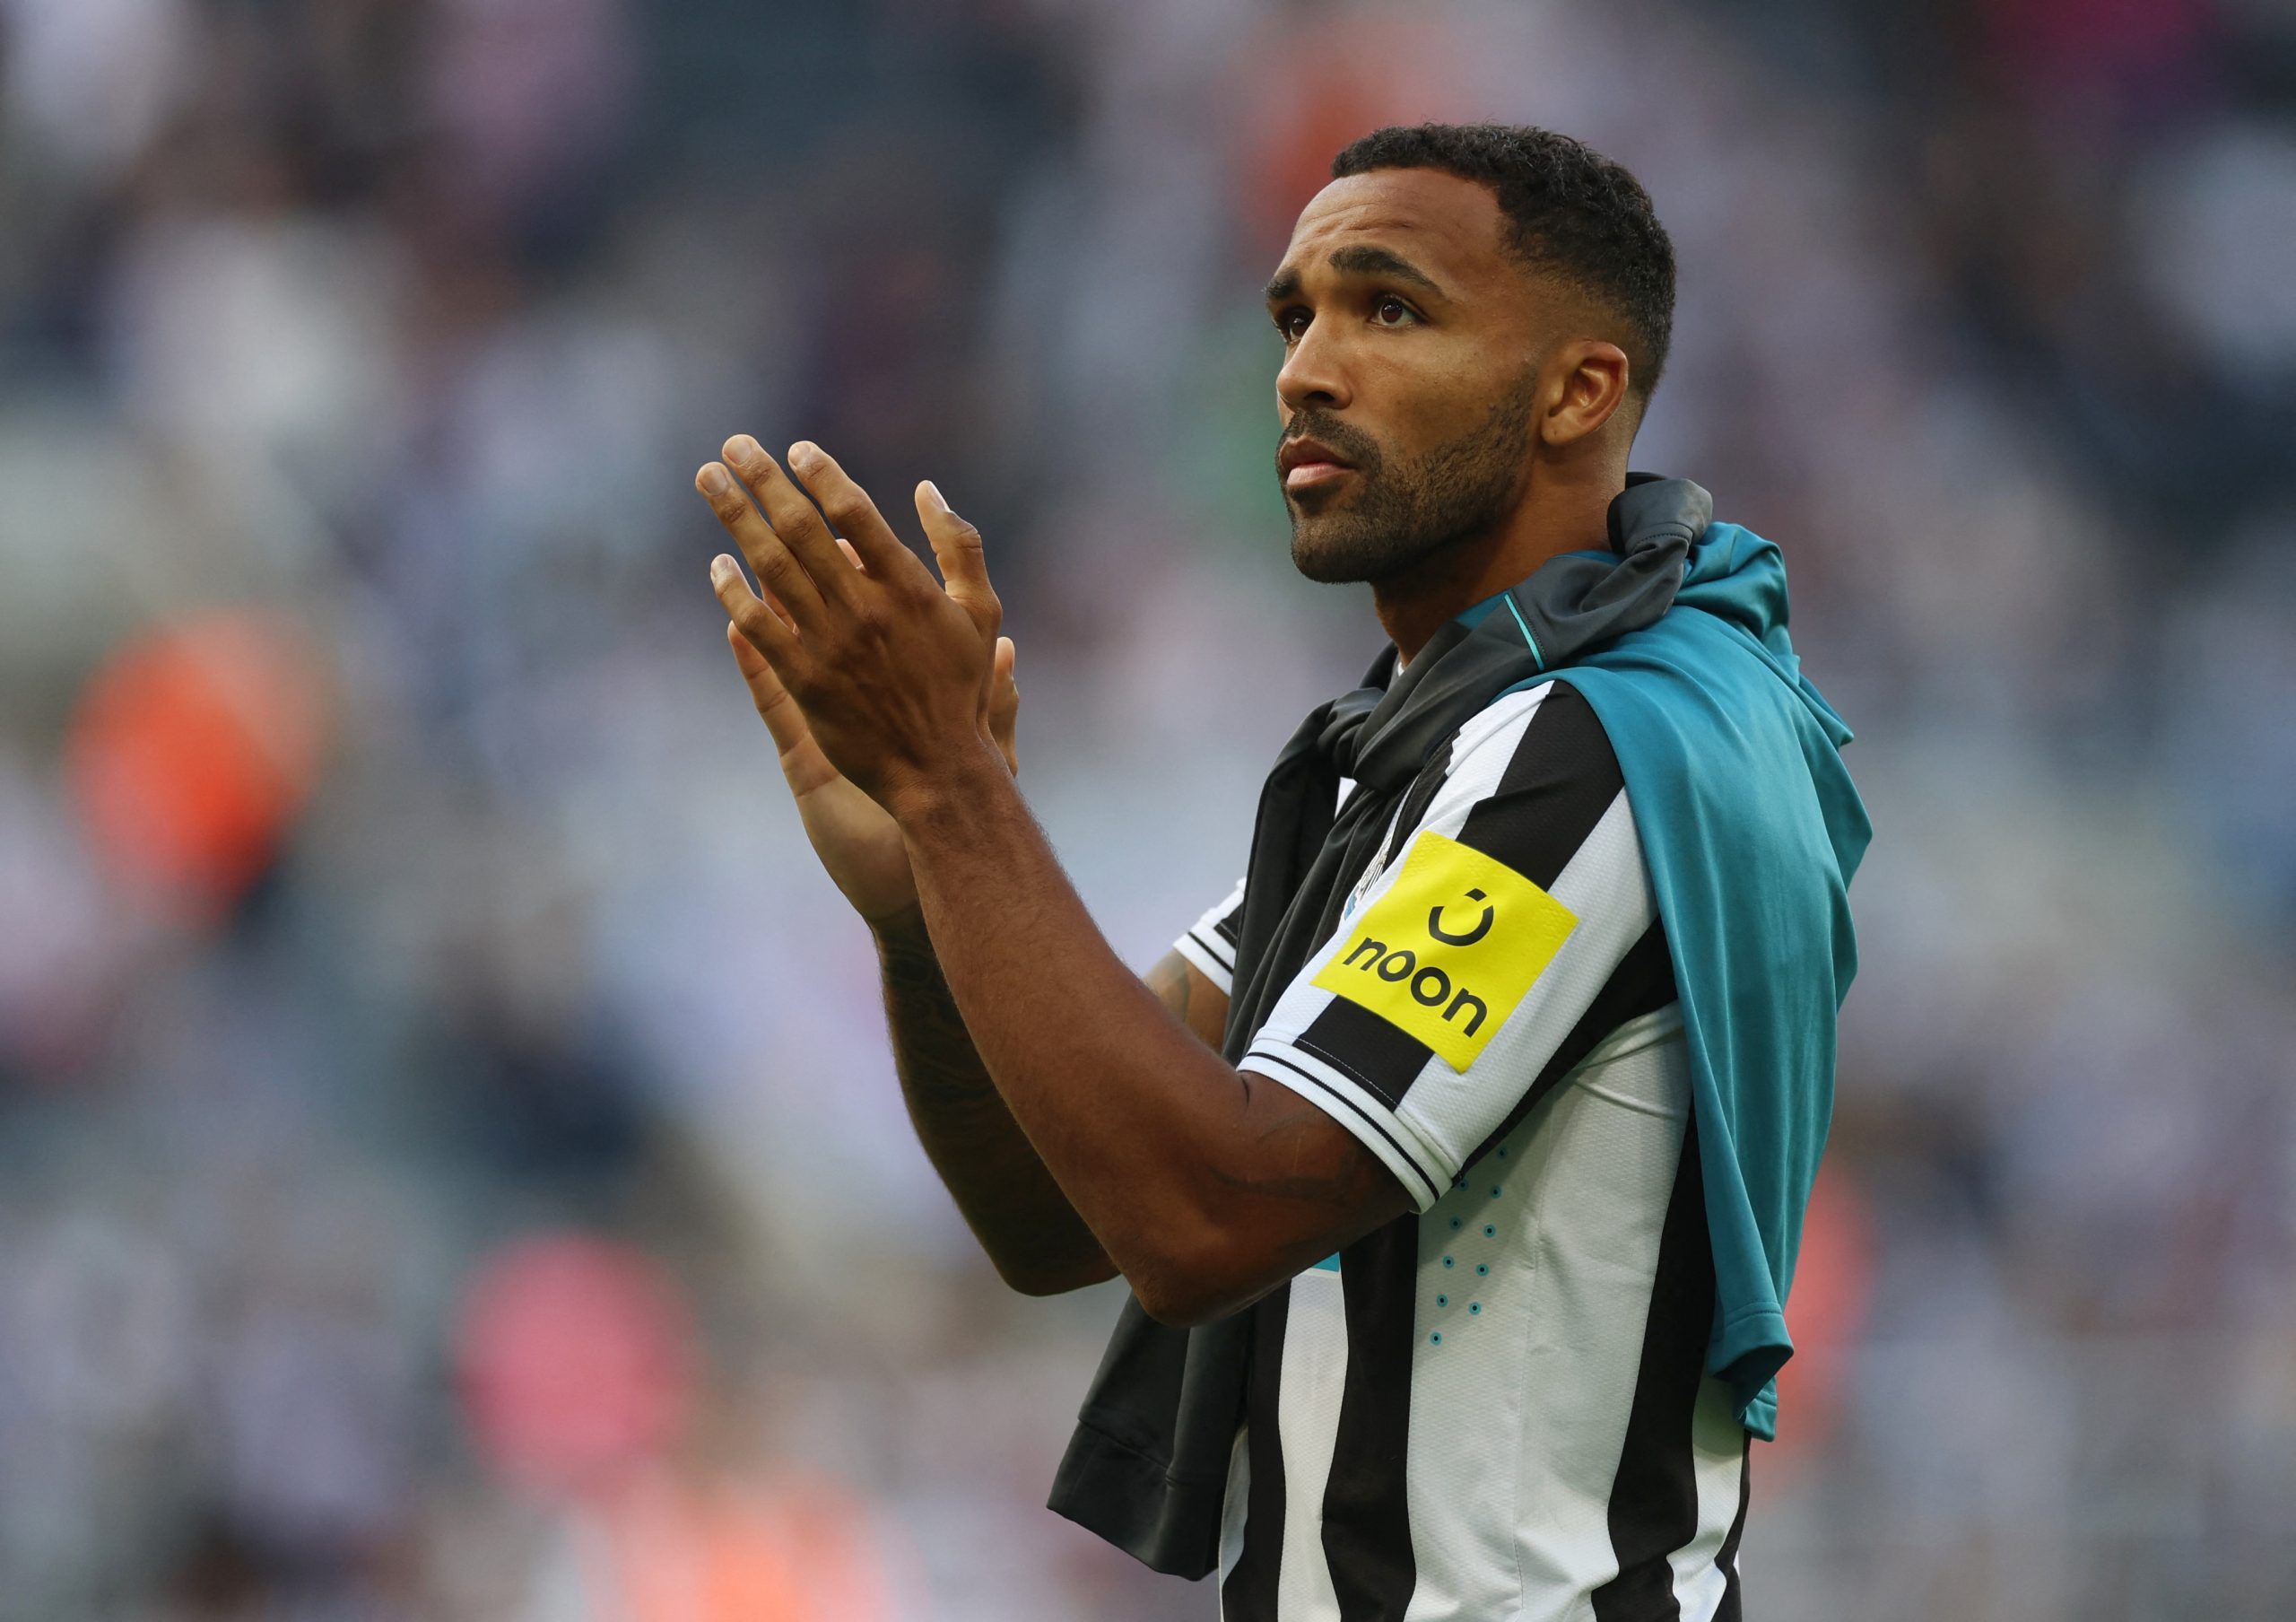 Soccer Football - Premier League - Newcastle United v Manchester City - St James' Park, Newcastle, Britain - August 21, 2022 Newcastle United's Callum Wilson applauds fans after the match Action Images via Reuters/Lee Smith EDITORIAL USE ONLY. No use with unauthorized audio, video, data, fixture lists, club/league logos or 'live' services. Online in-match use limited to 75 images, no video emulation. No use in betting, games or single club /league/player publications.  Please contact your accoun